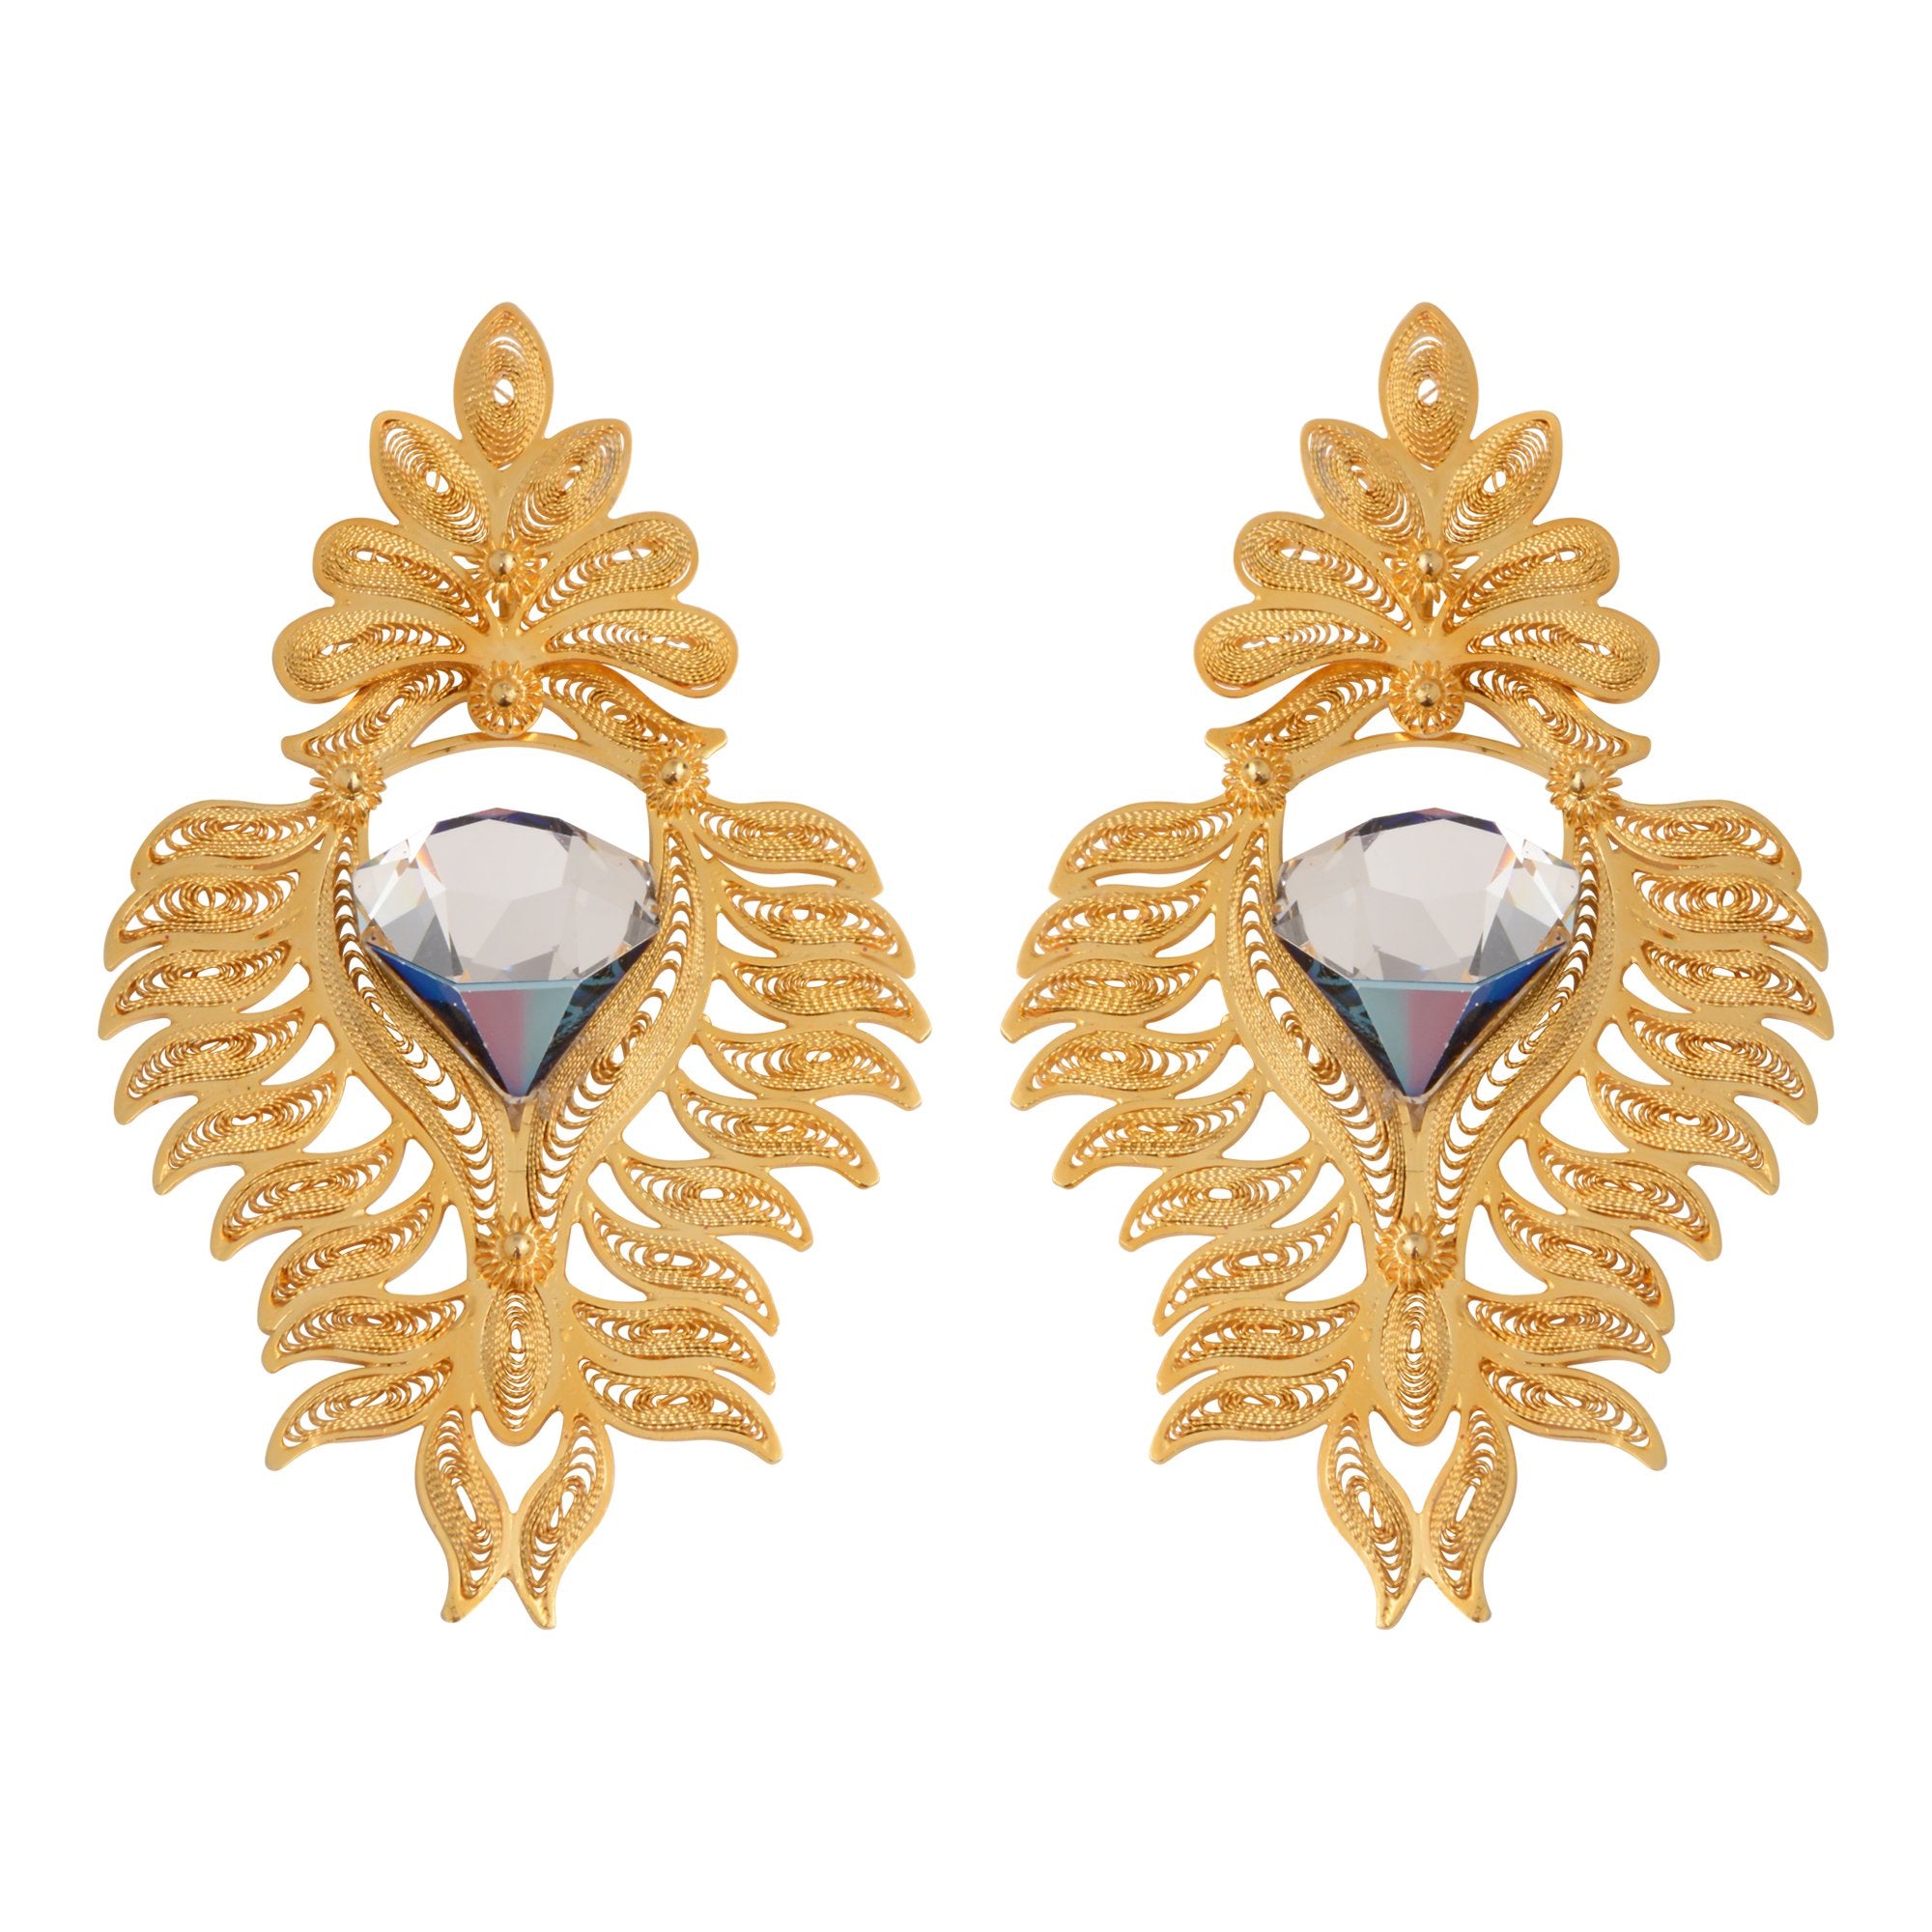 Queen Gold Plated Swarovski crystal earrings - My Paloma